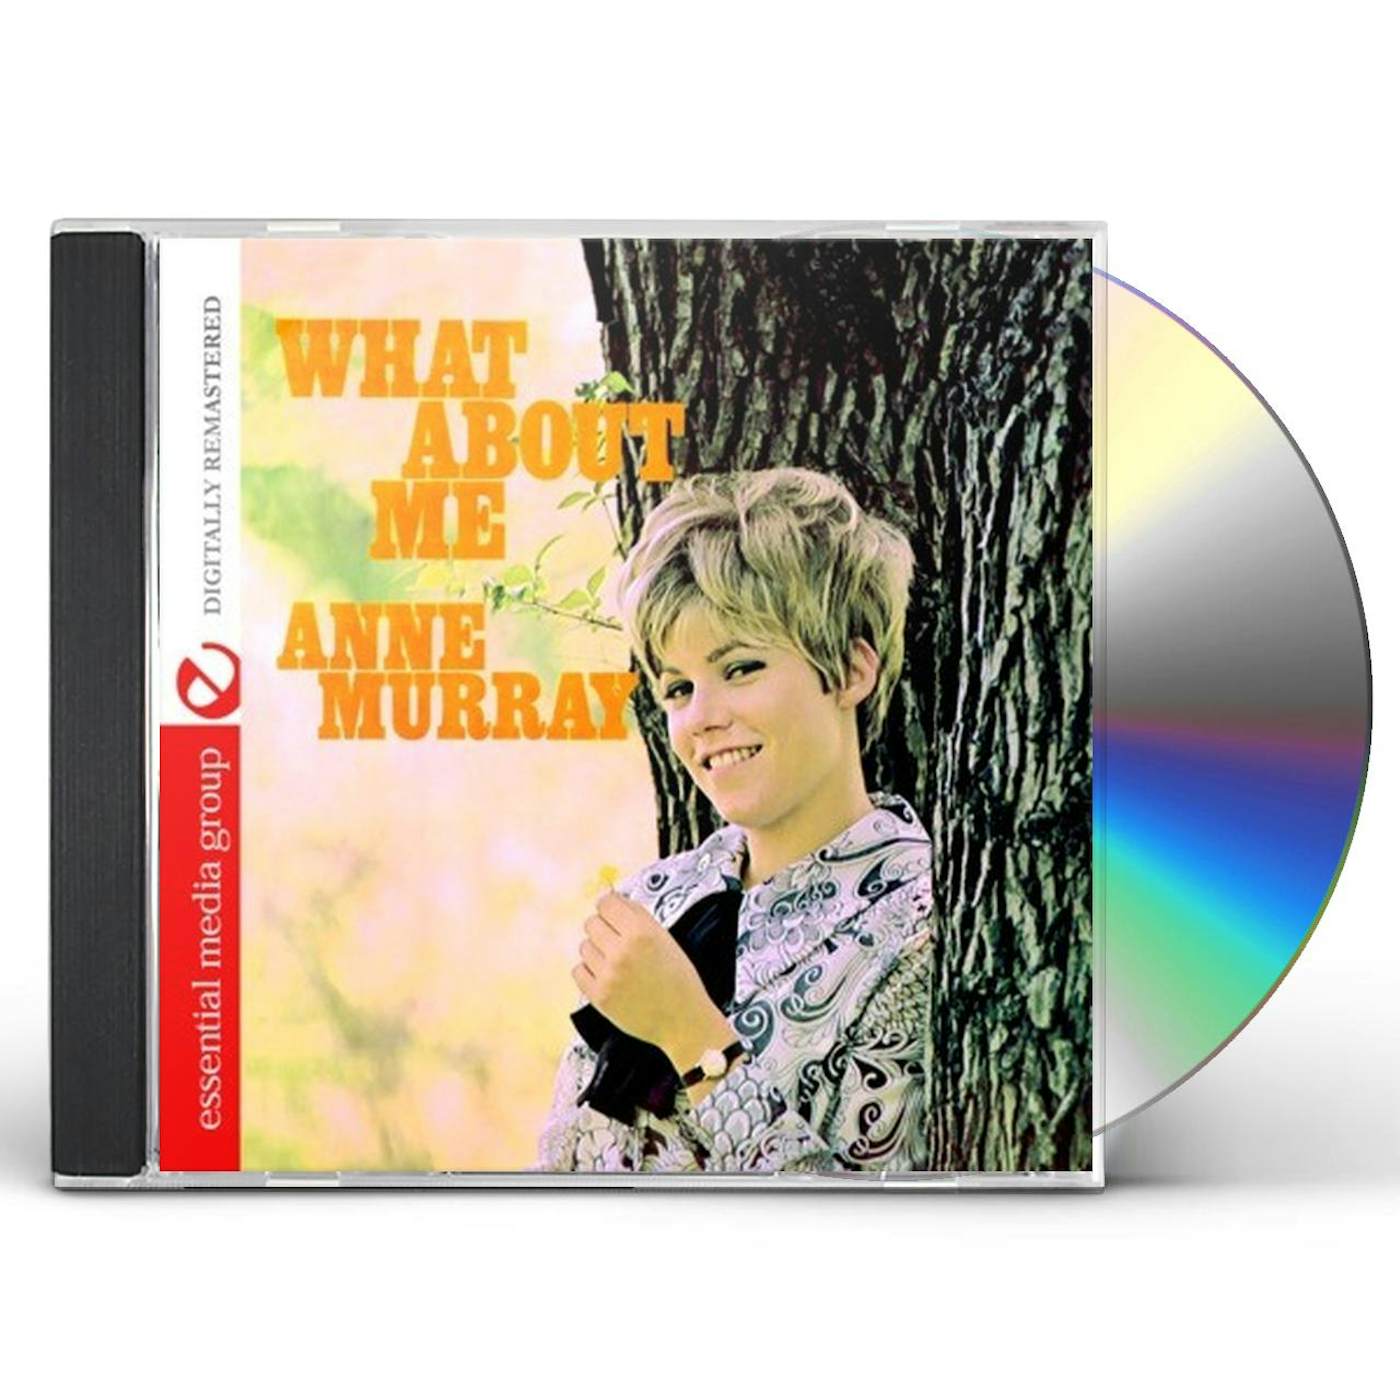 Anne Murray WHAT ABOUT ME CD